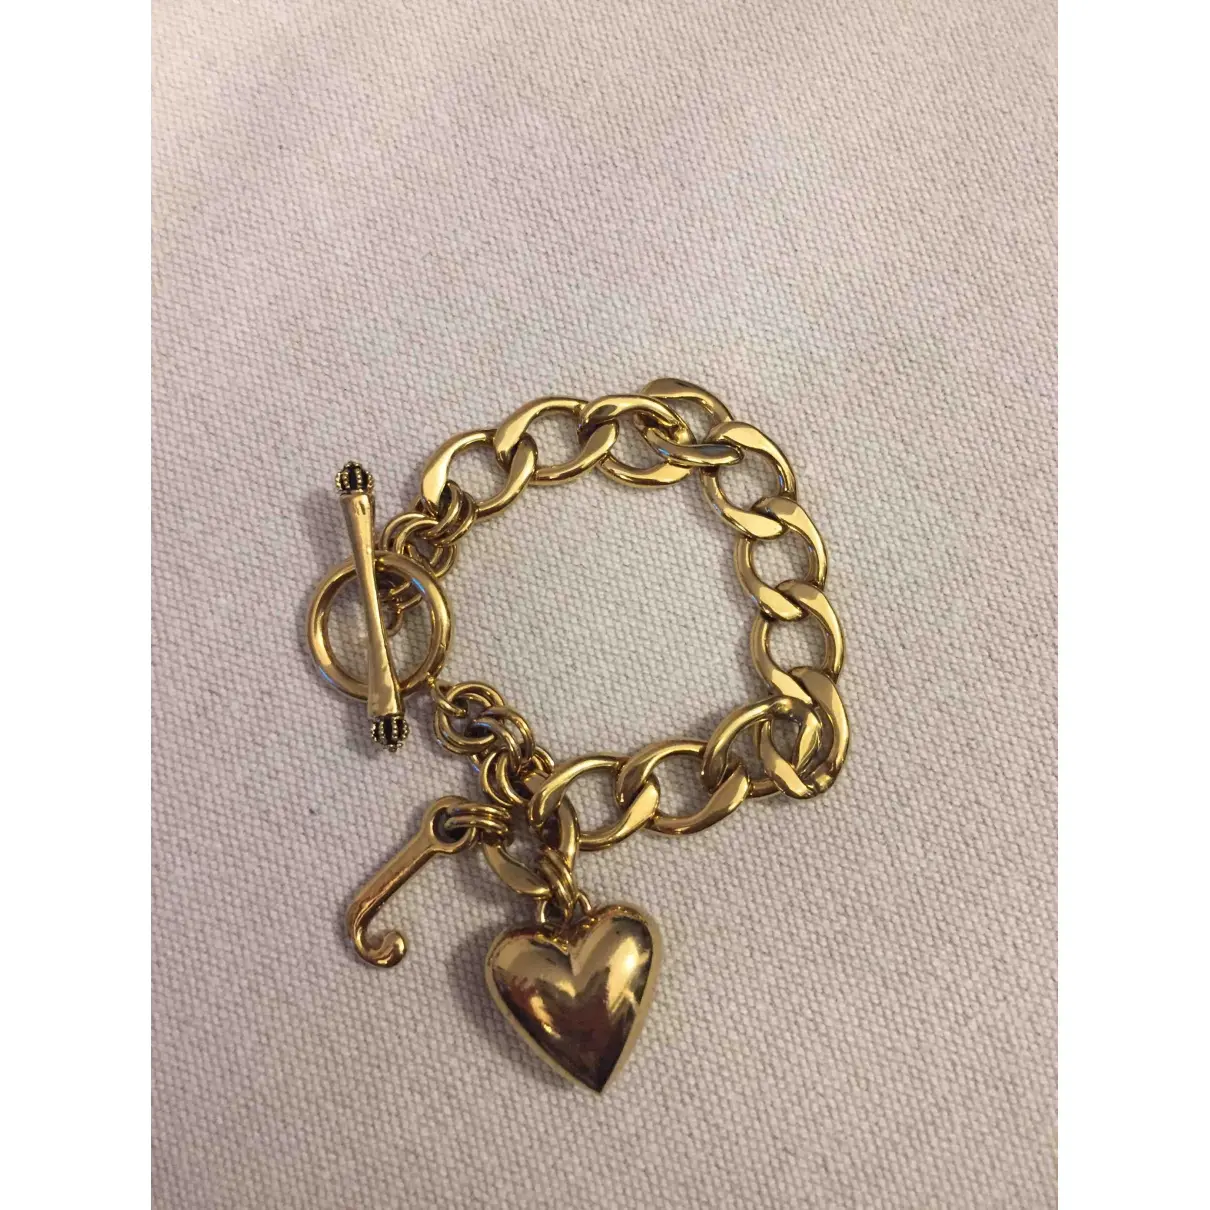 Juicy Couture Gold Metal Bracelet for sale